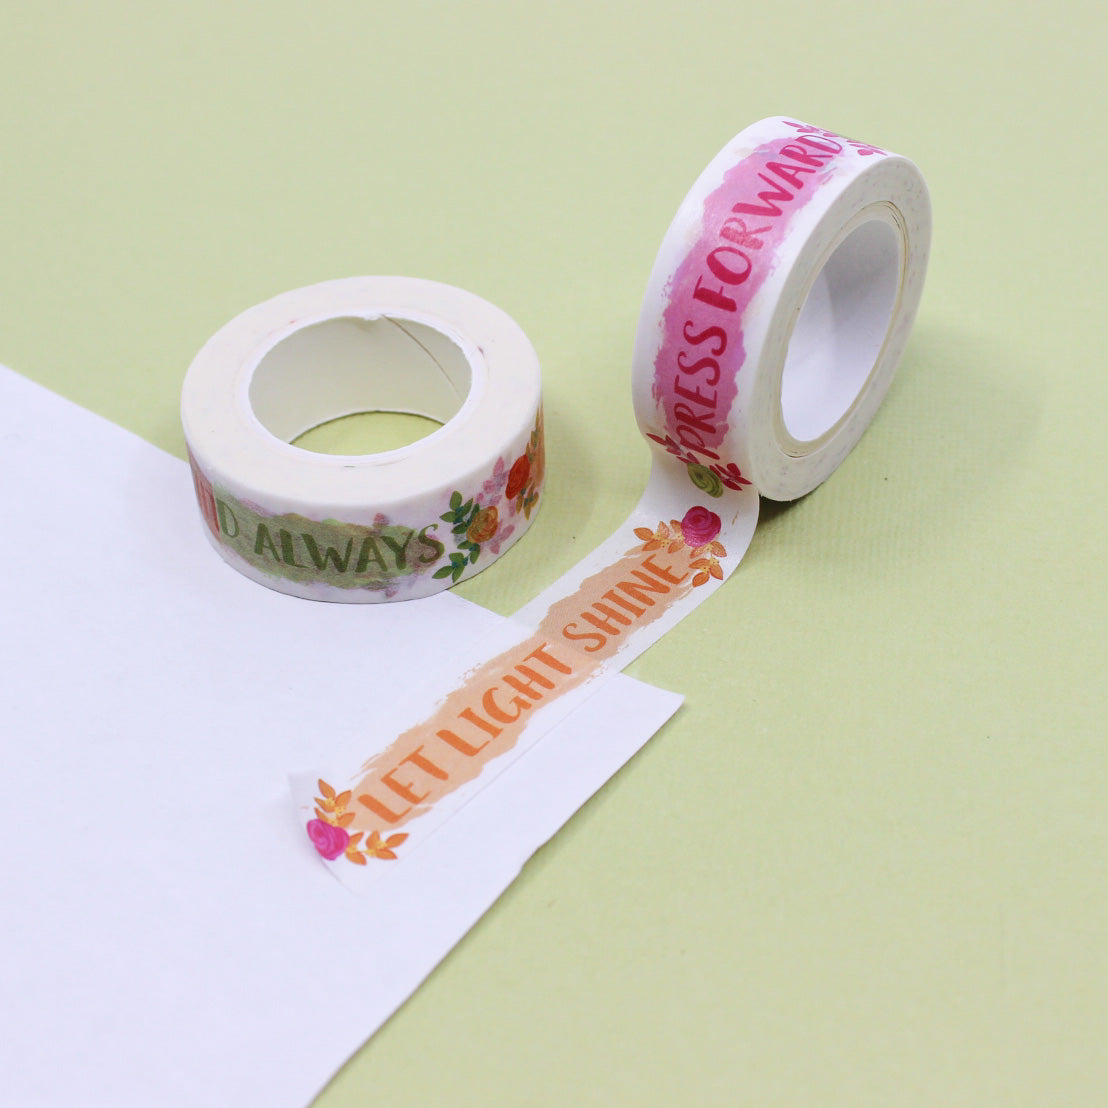 Enhance your Bible journaling experience with our faith-themed washi tape, ideal for adding meaningful and encouraging phrases to your pages, deepening your spiritual reflection. This tape is sold at BBB Supplies Craft Shop.